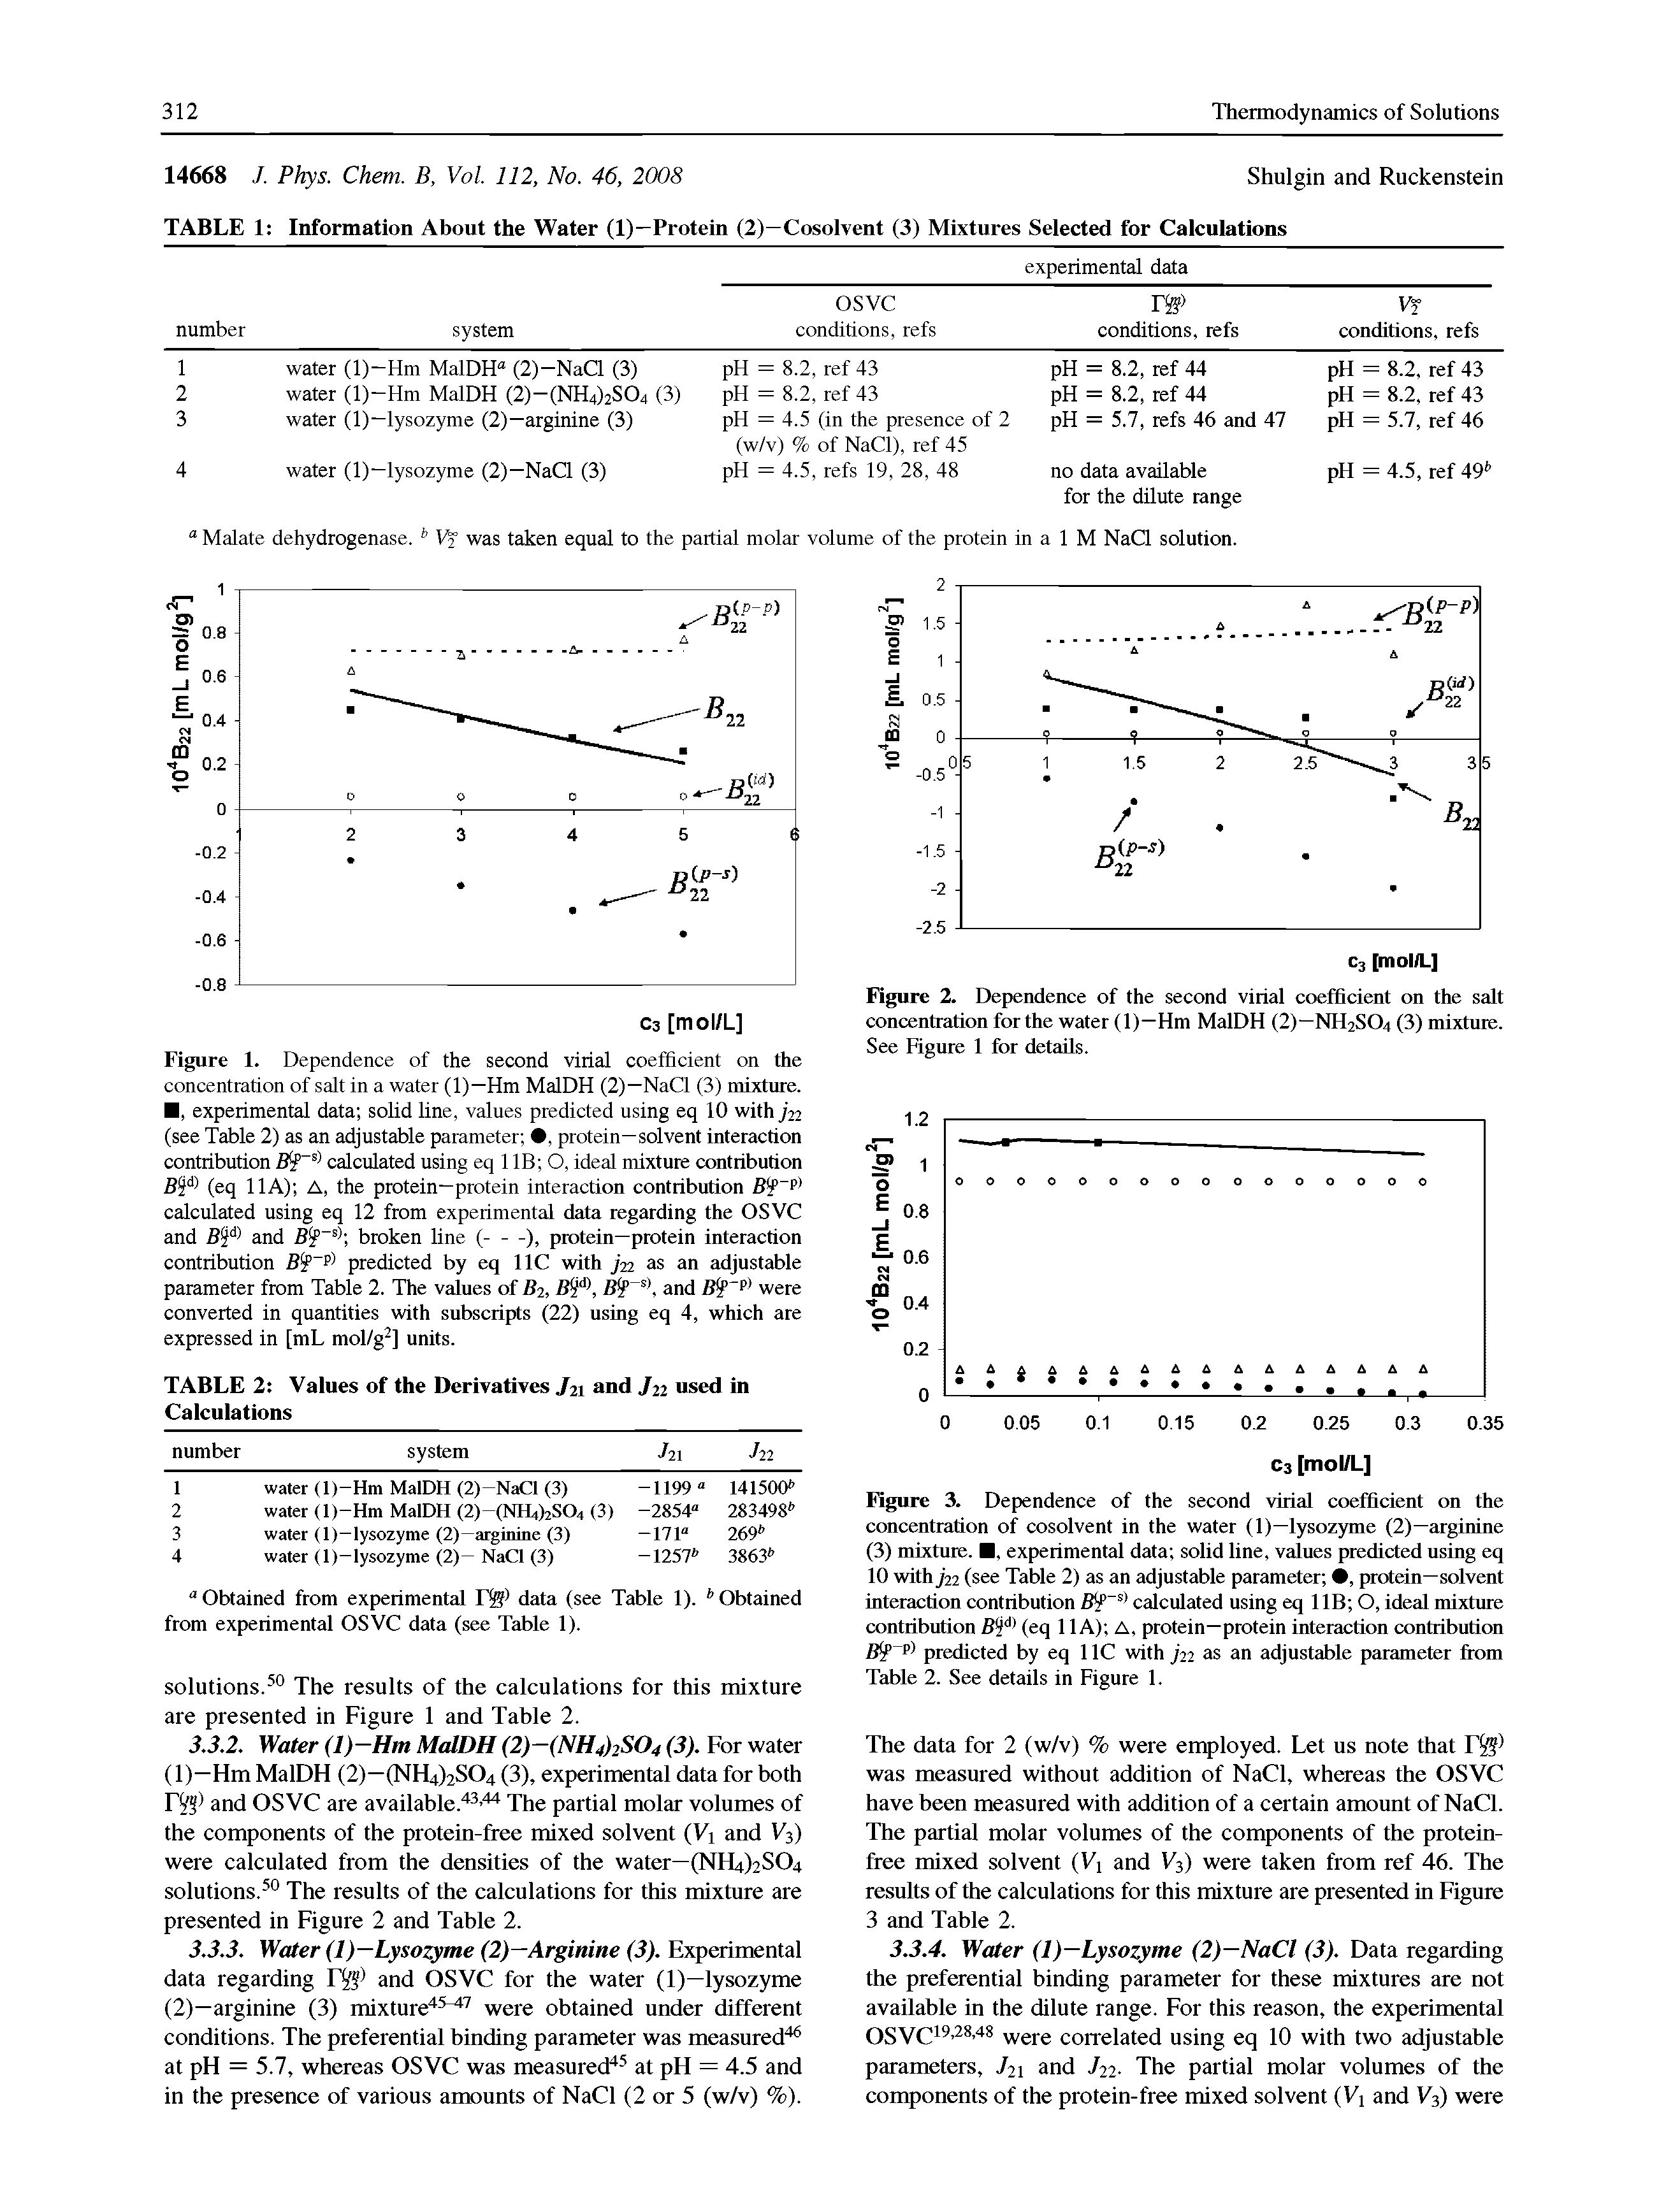 Figure 3. Dependence of the second virial coefficient on the concentration of cosolvent in the water (1)—lysozyme (2)—arginine (3) mixture. , experimental data solid line, values predicted using eq 10 with722 (see Table 2) as an adjustable parameter , protein—solvent interaction contribution B " calculated using eq IIB O, ideal mixture contribution B (eq 11 A) A, protein—protein interaction contribution B " P predicted by eq 11C with 722 as an adjustable parameter from Table 2. See details in Figure 1.